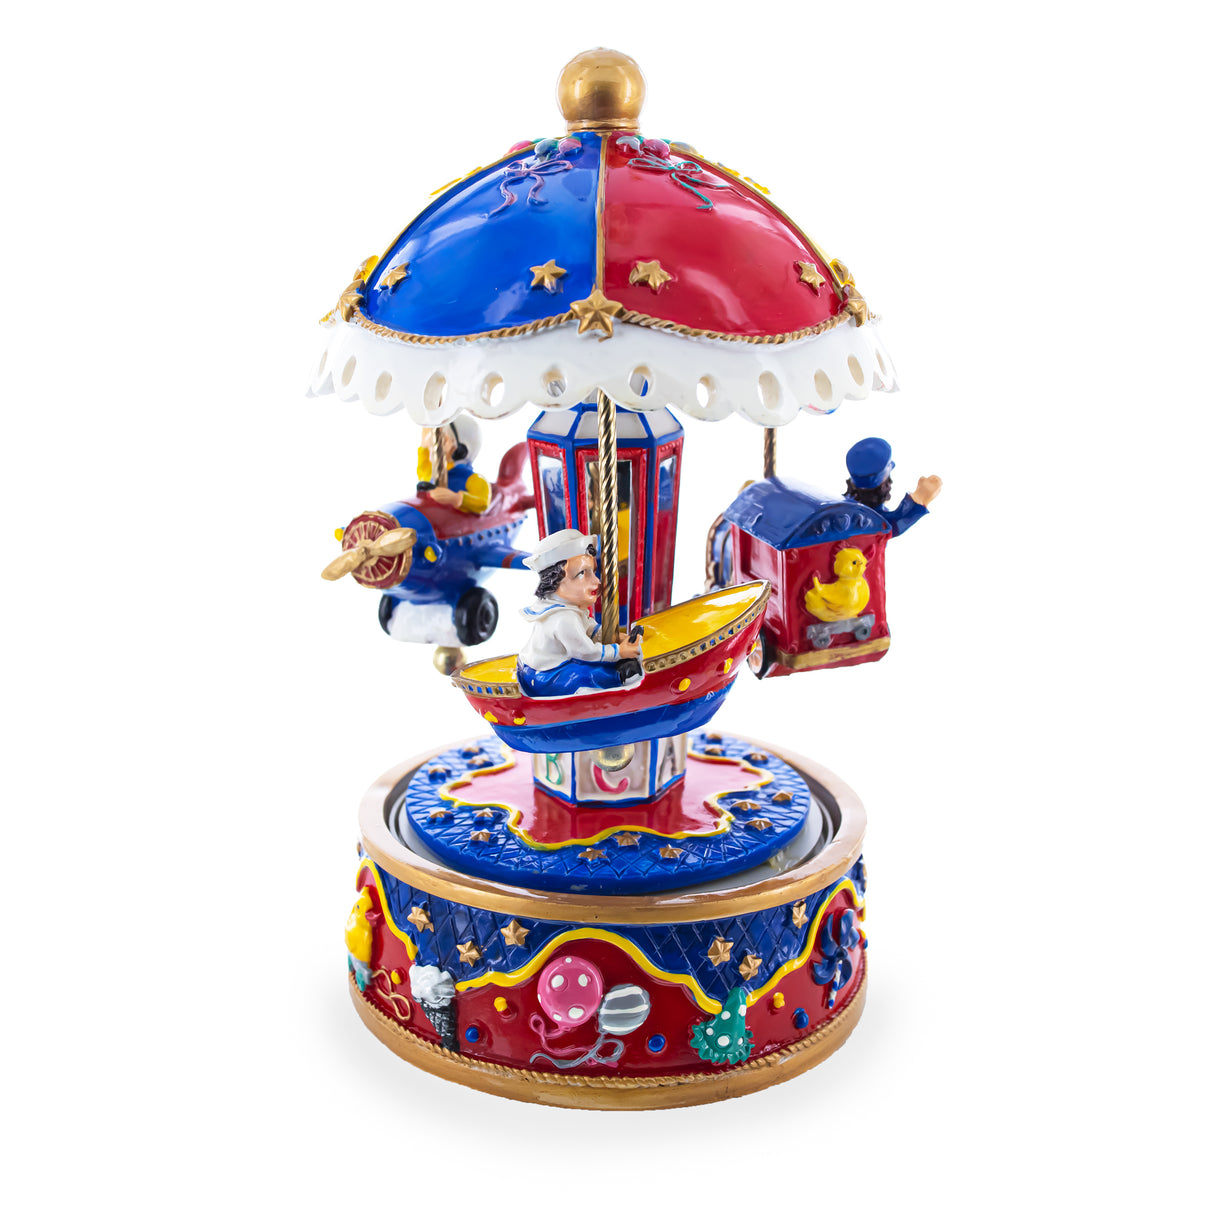 BestPysanky online gift shop sells Christmas water globe music box musical collectible figurine xmas decoration rotating animated spinning animated unique picture personalized cool wind up children's kids